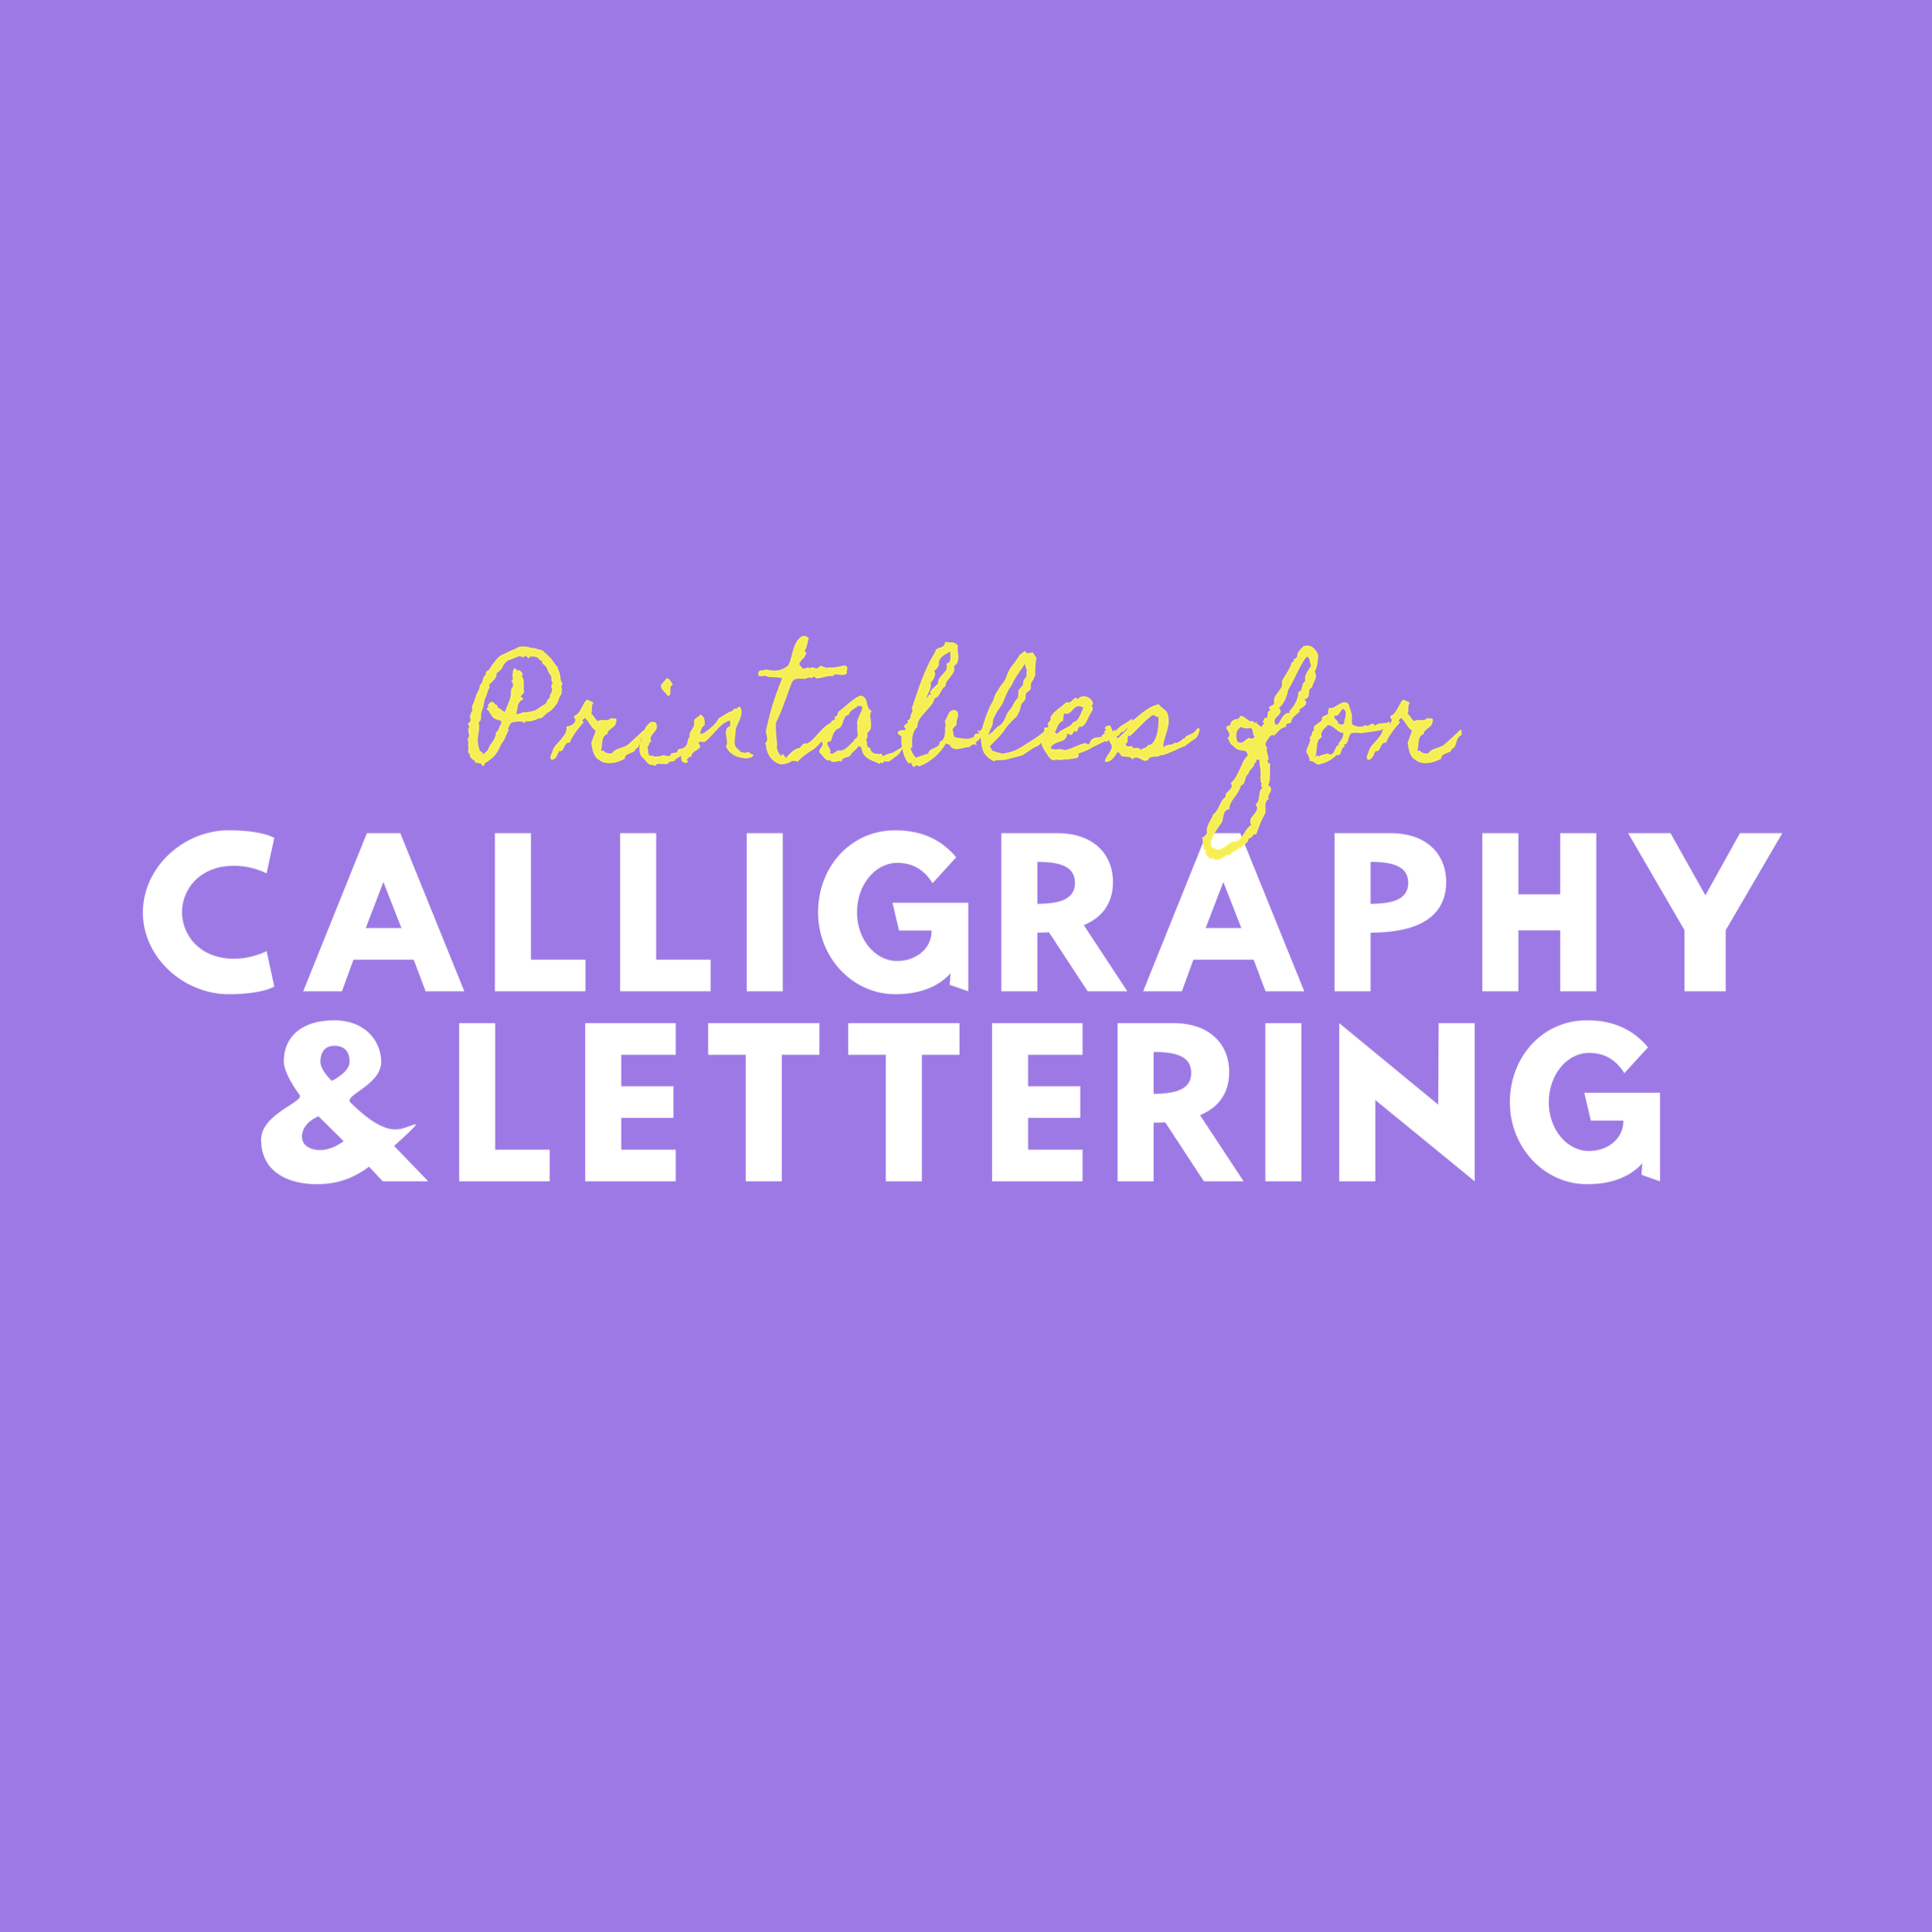 Printable for Lettering - The Craft Central